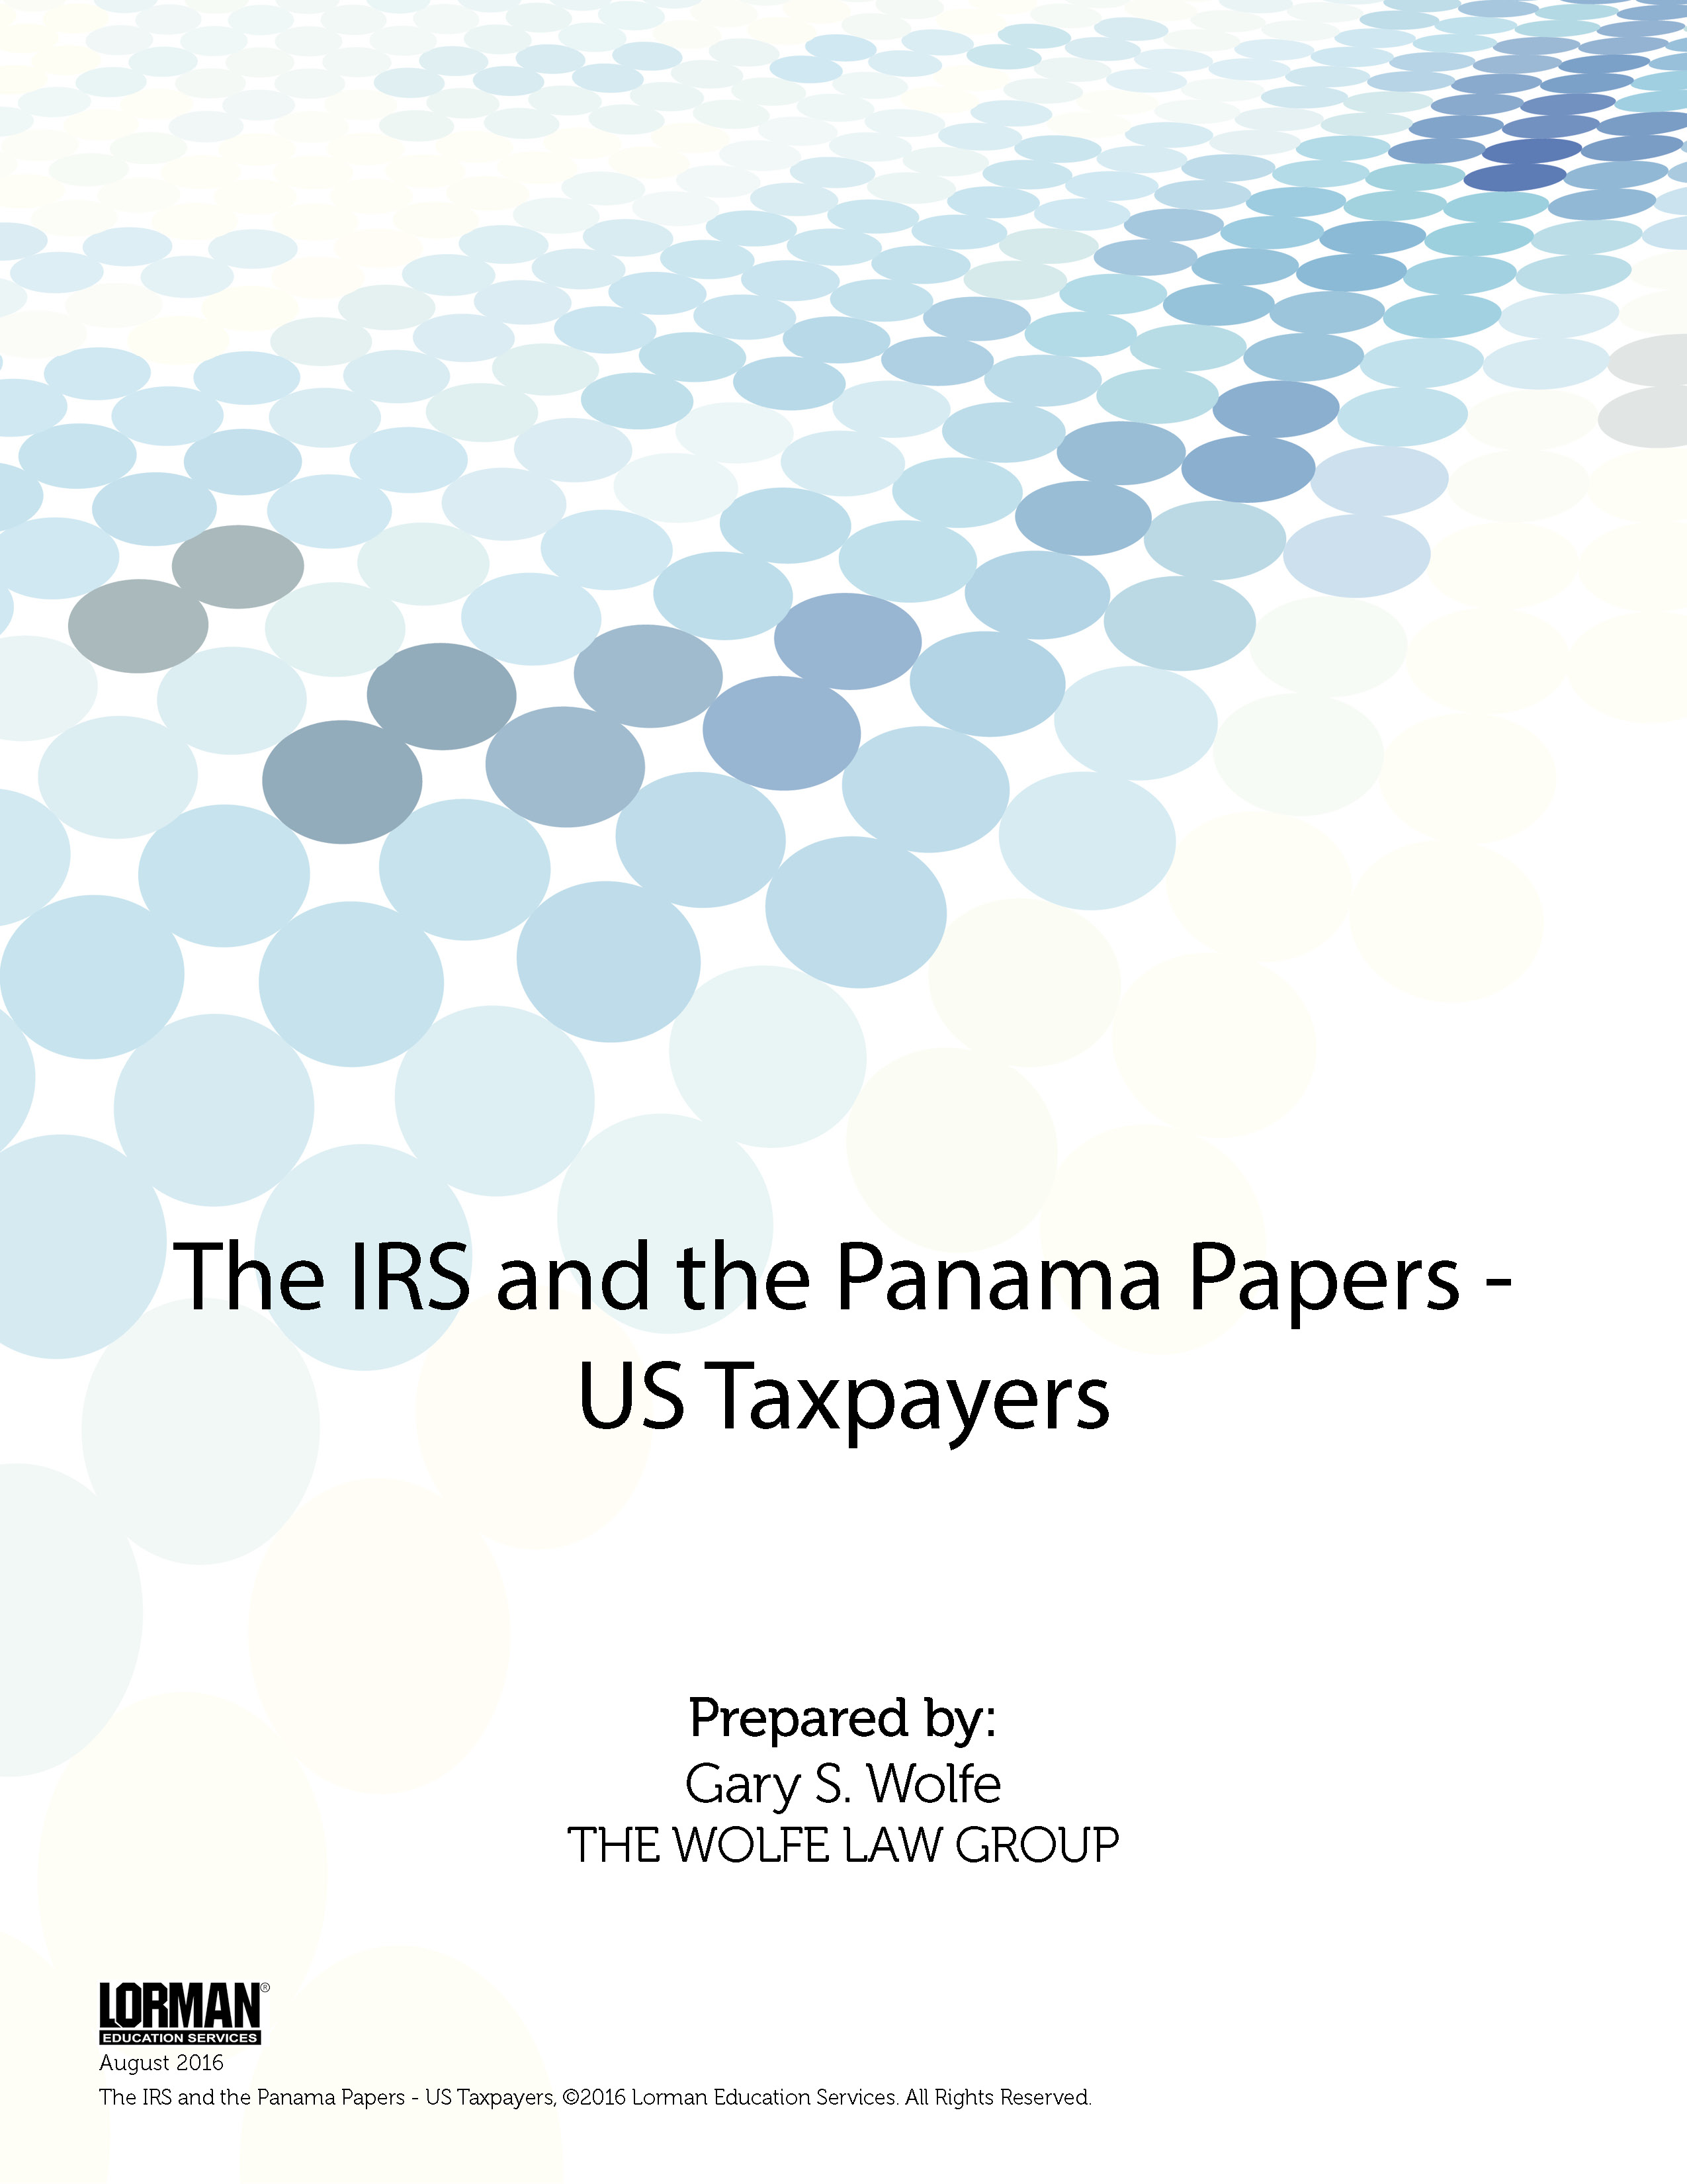 The IRS and the Panama Papers - US Taxpayers